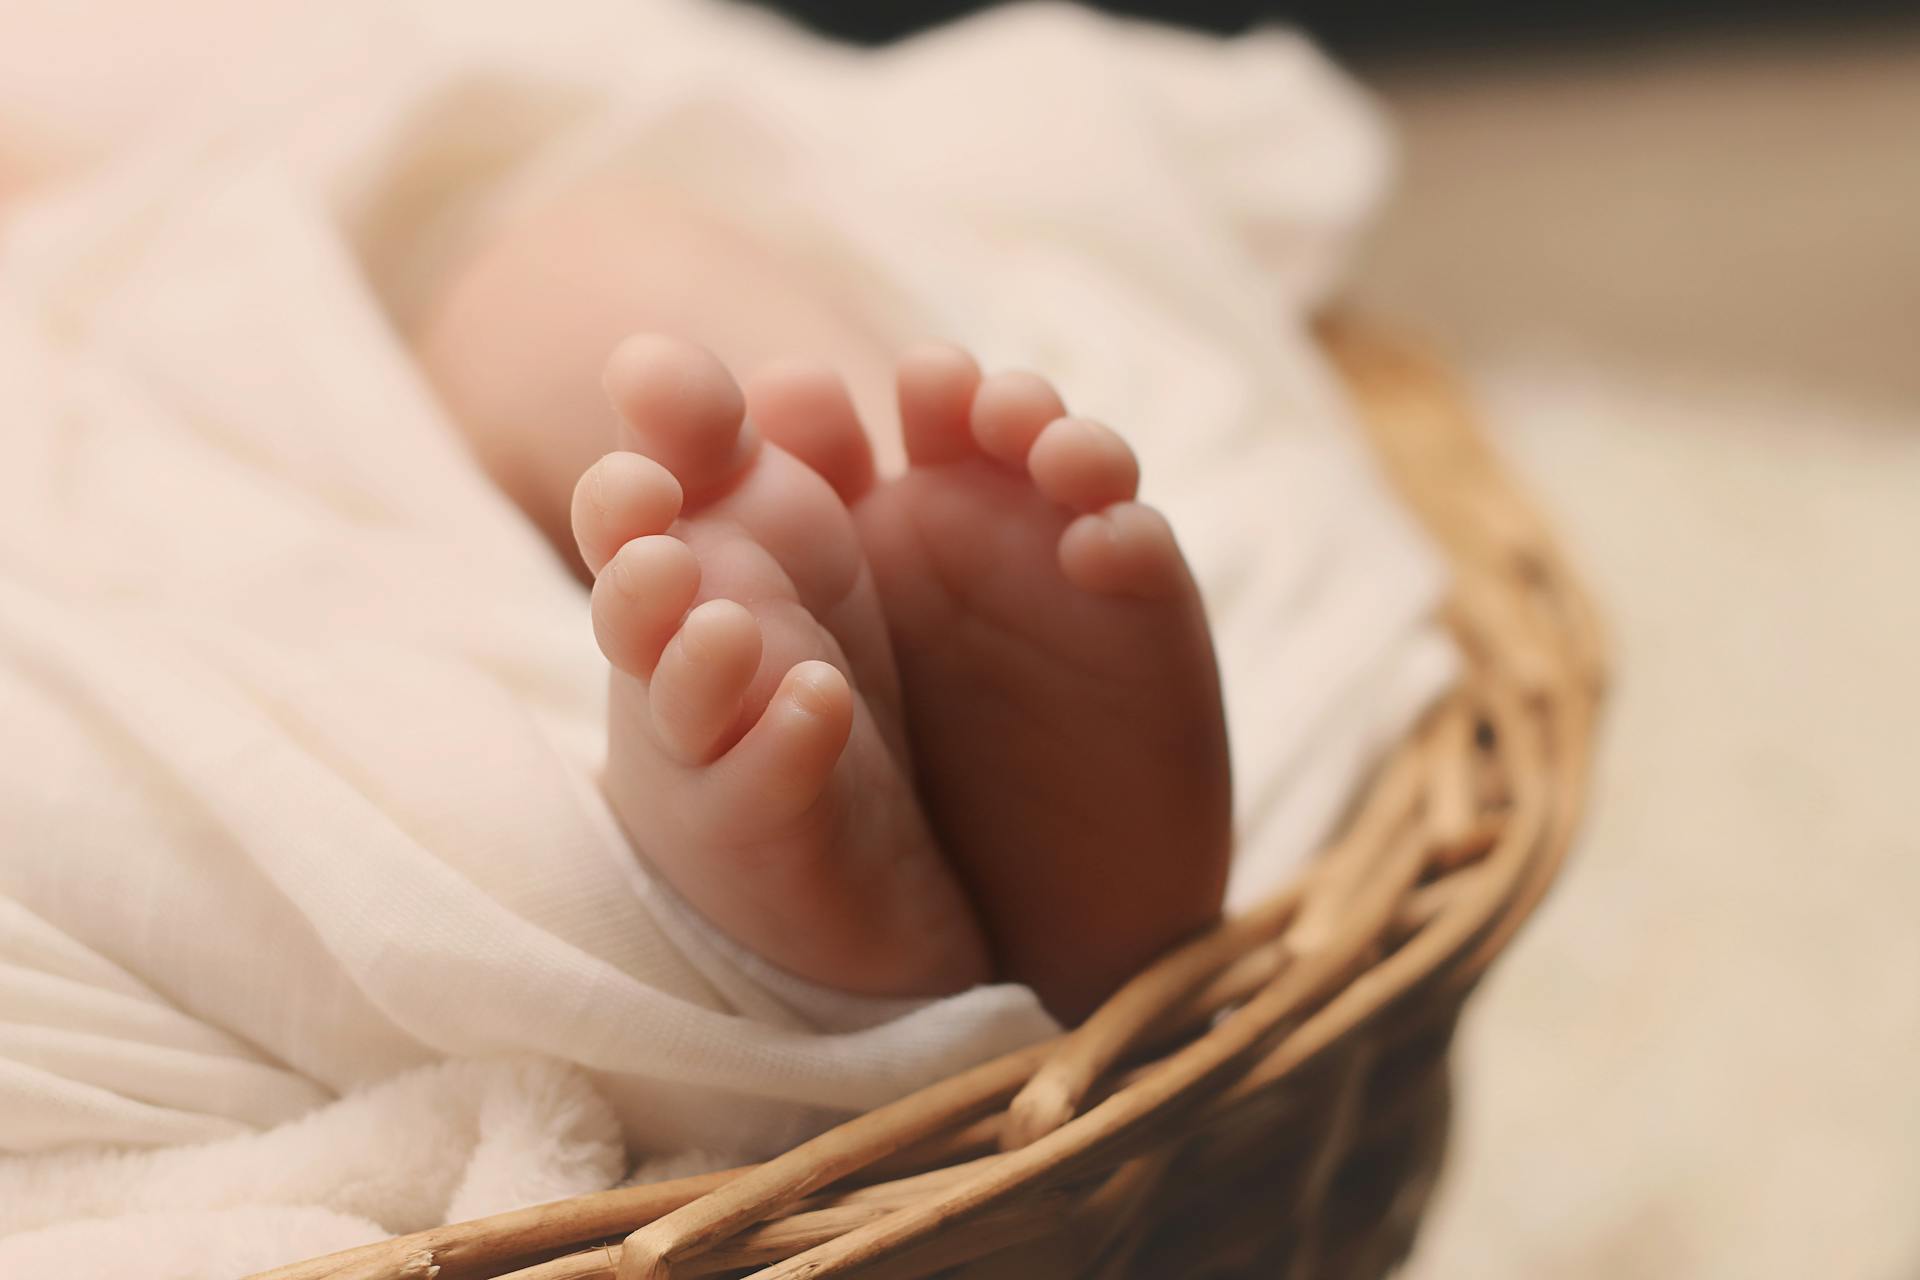 A baby's feet | Source: Pexels